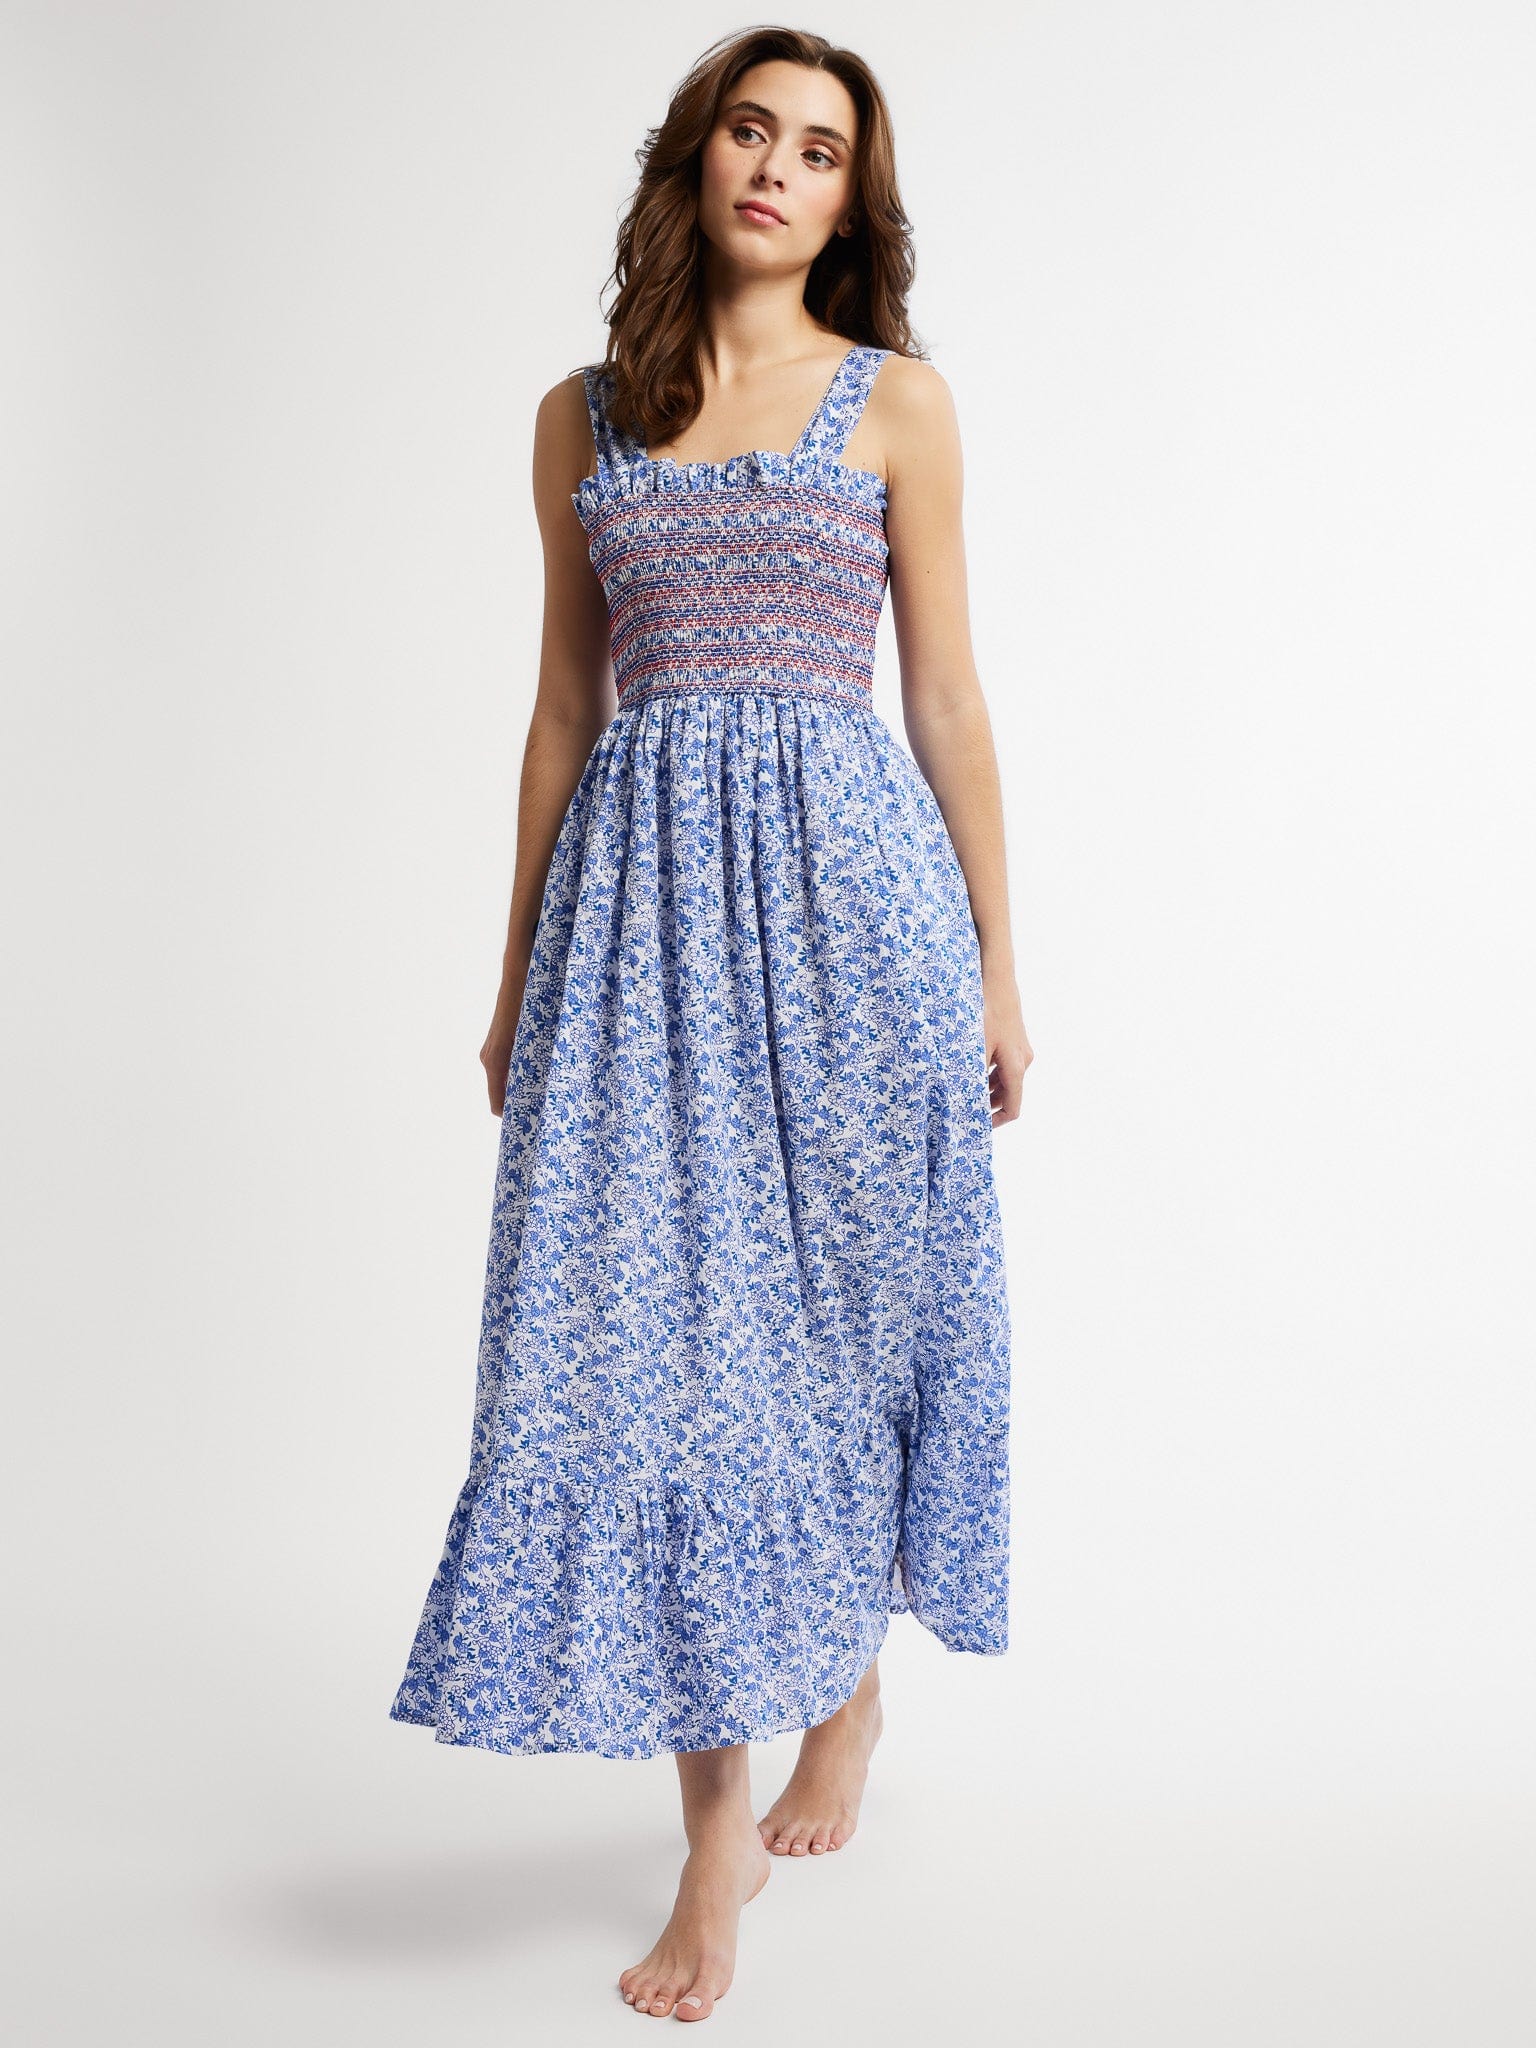 MILLE Clothing Garden Dress in Condesa Floral